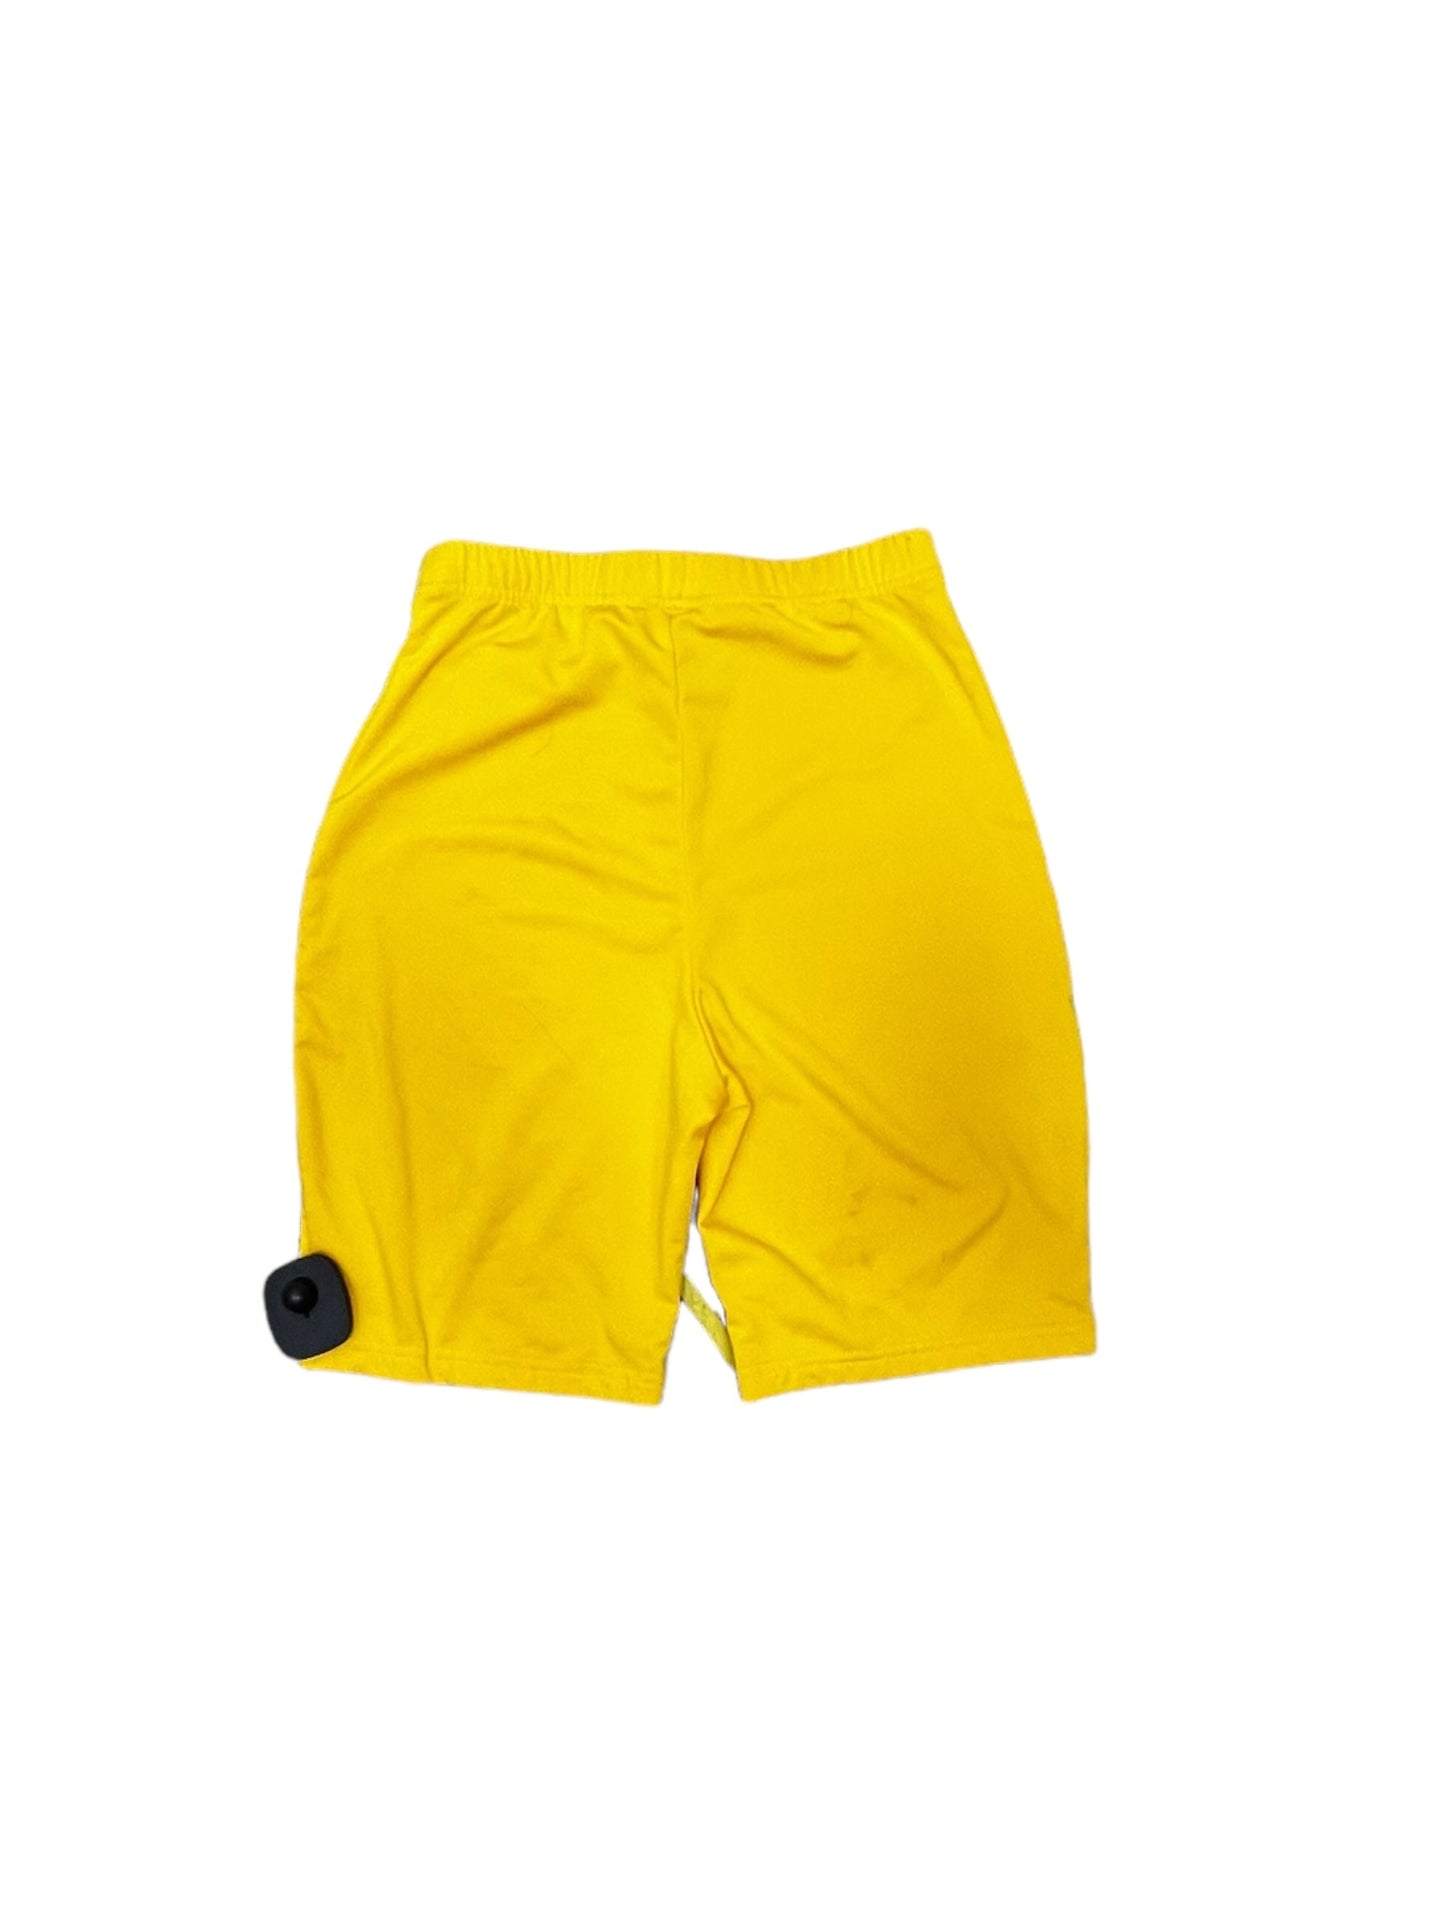 Yellow Shorts Set Clothes Mentor, Size S